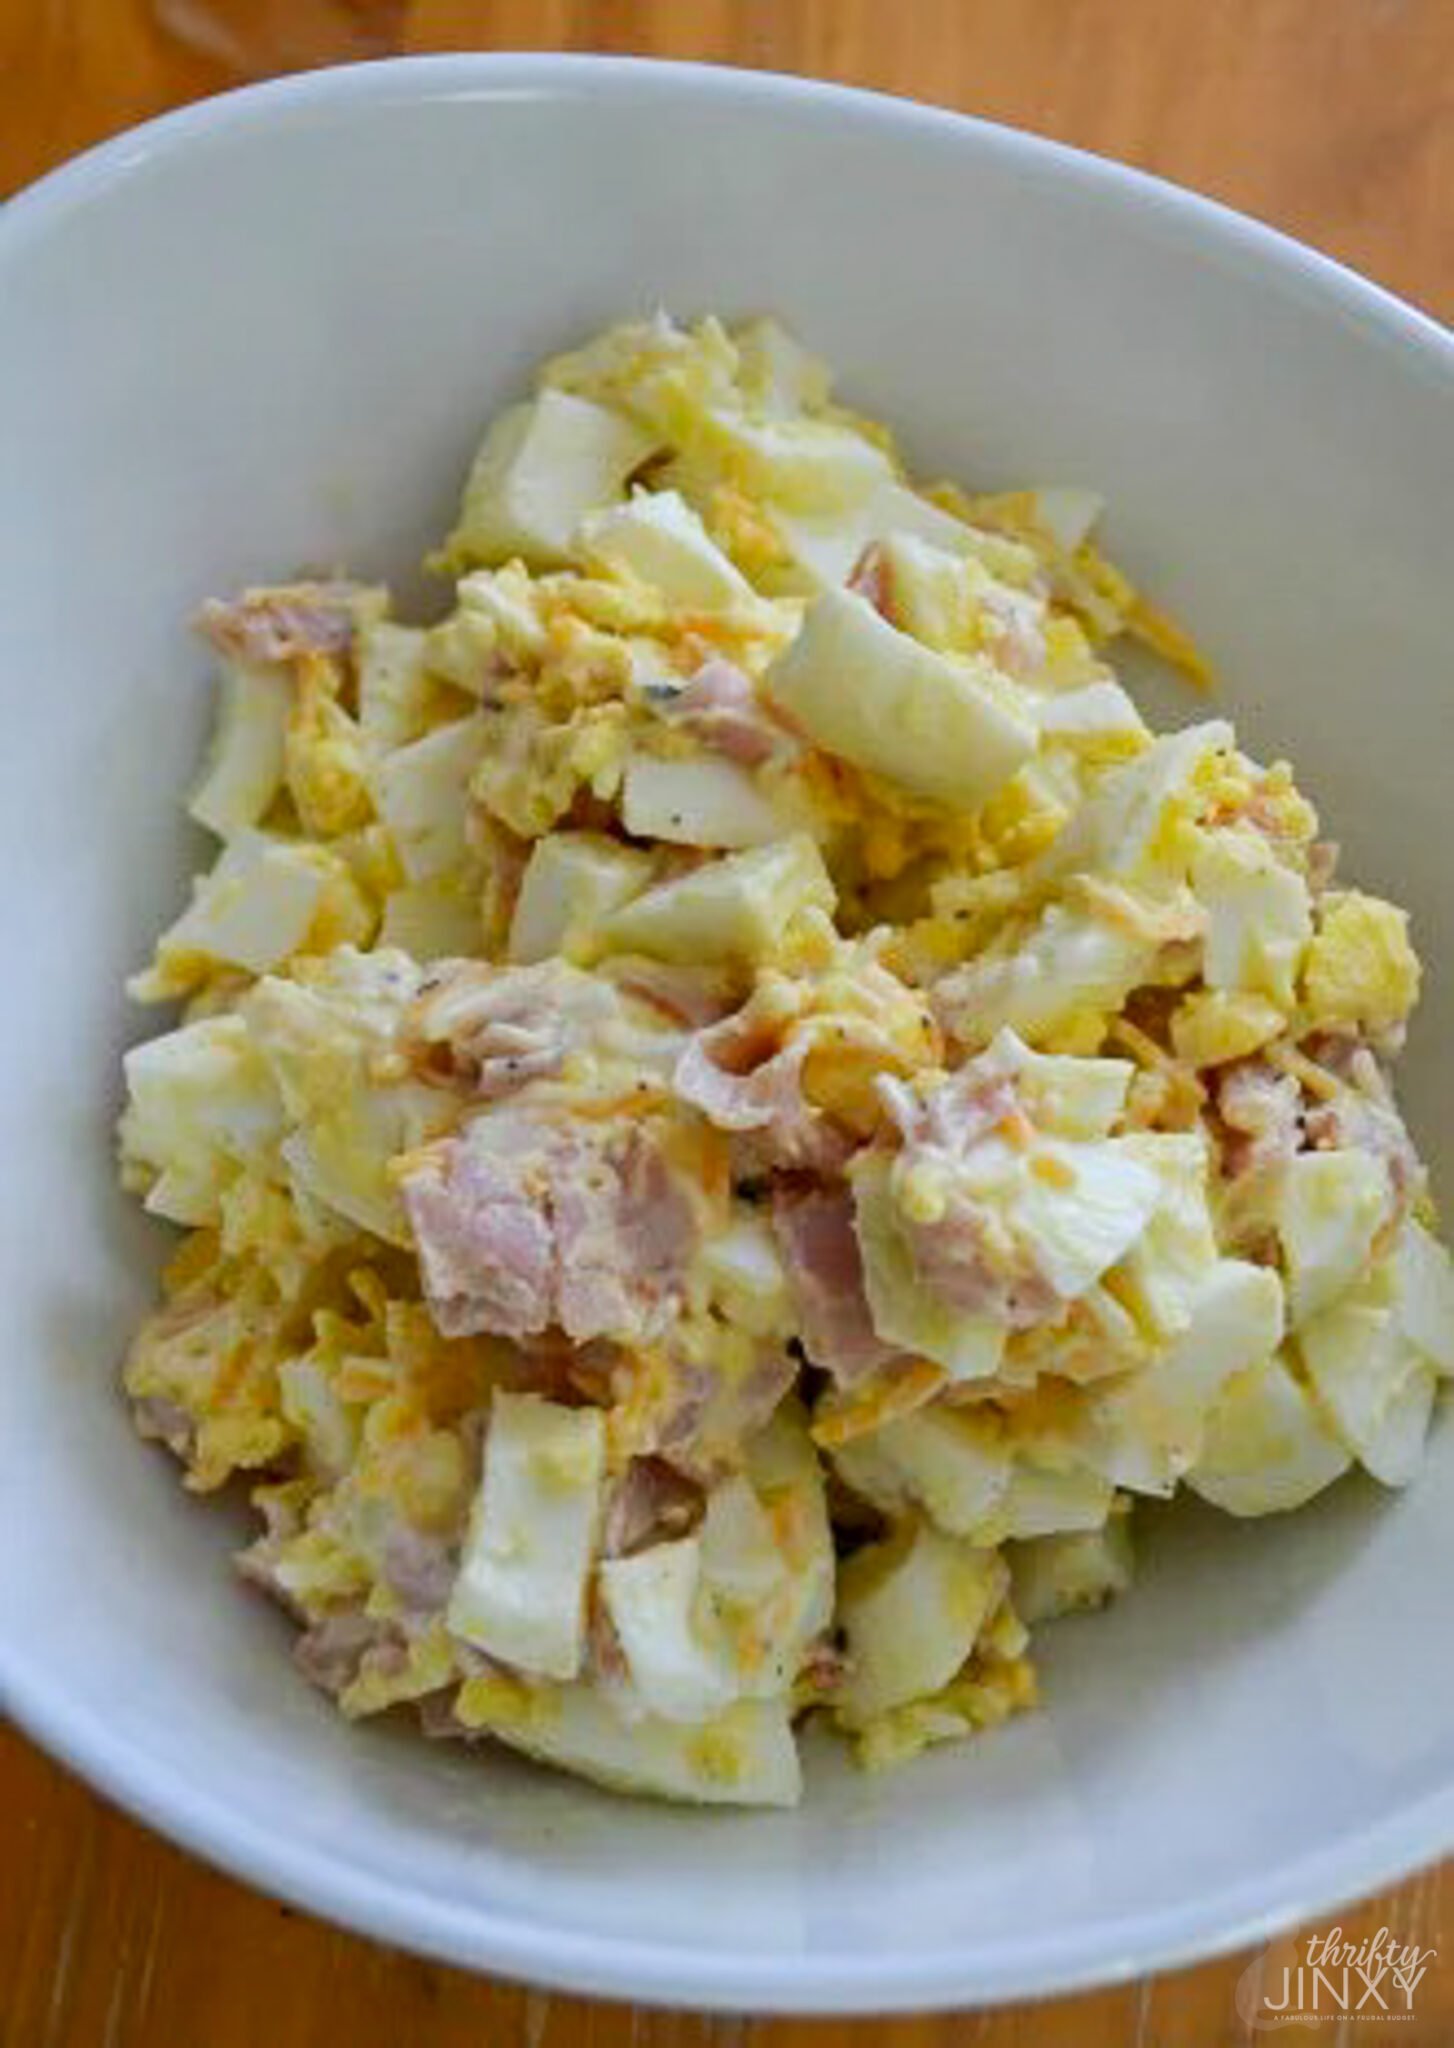 Use Up Leftover Hard-Boiled Easter Eggs - Yummy Recipe! - Thrifty Jinxy